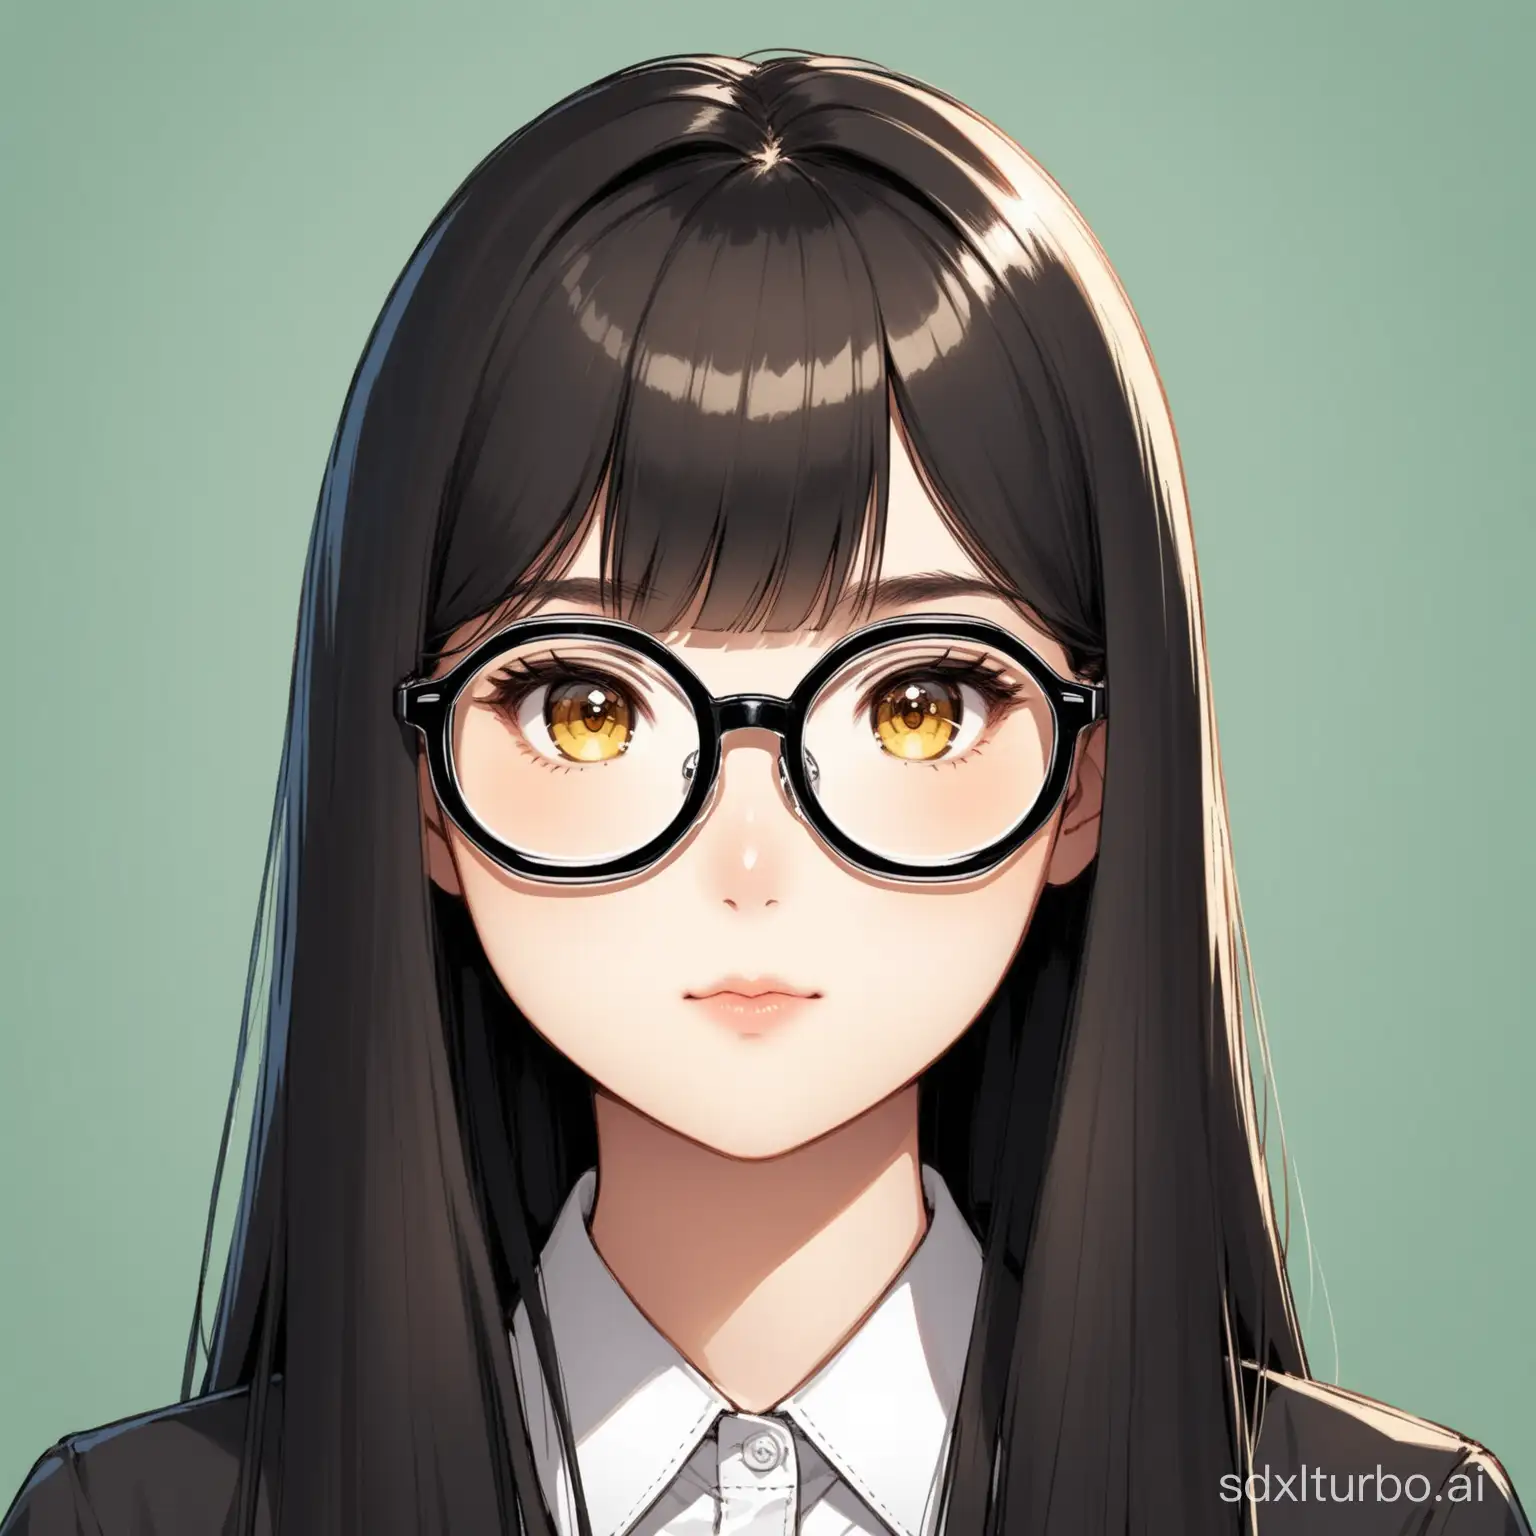 Work ID photo, bangs, straight long hair, thick black frame glasses, round face, slightly yellowish skin